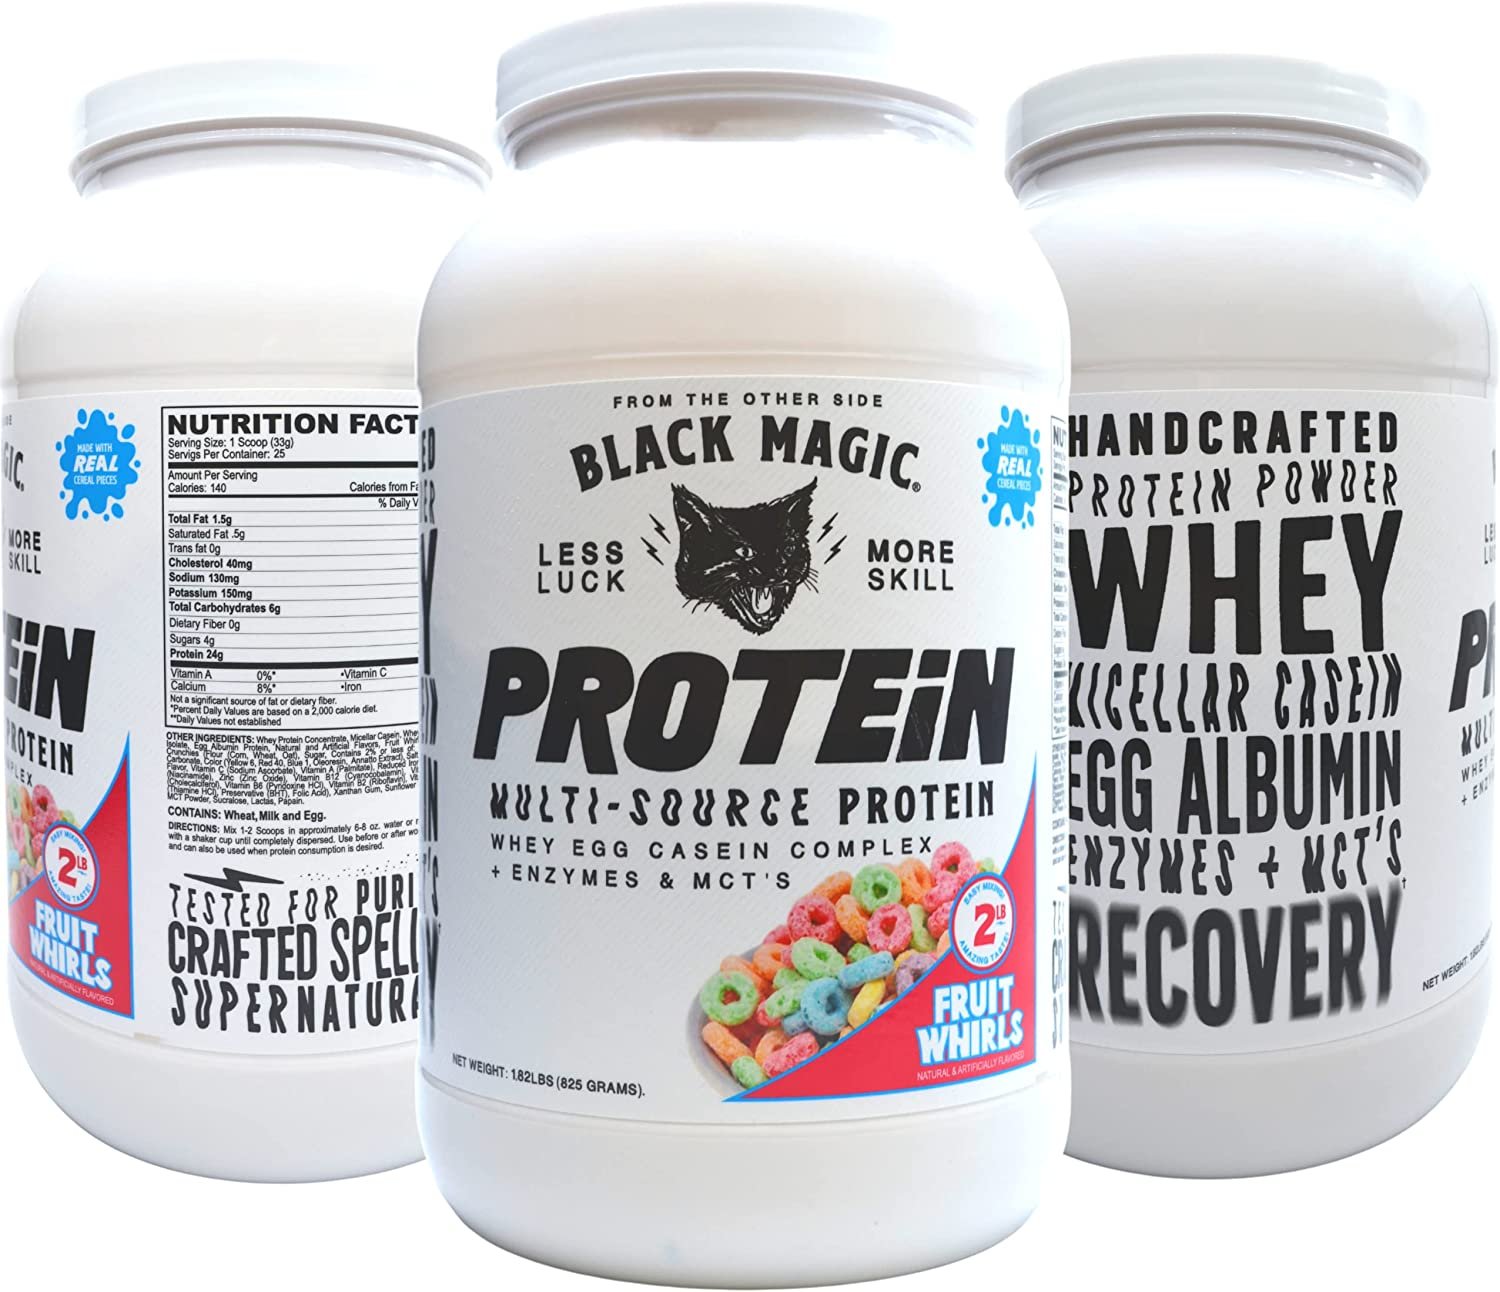 Fruit Whirls Black Magic Multi-Source Protein - Whey, Egg, and Casein Complex with Enzymes & MCT Powder - Pre Workout and Post Workout - 24g Protein - 2 LB with Bonus Key Chain